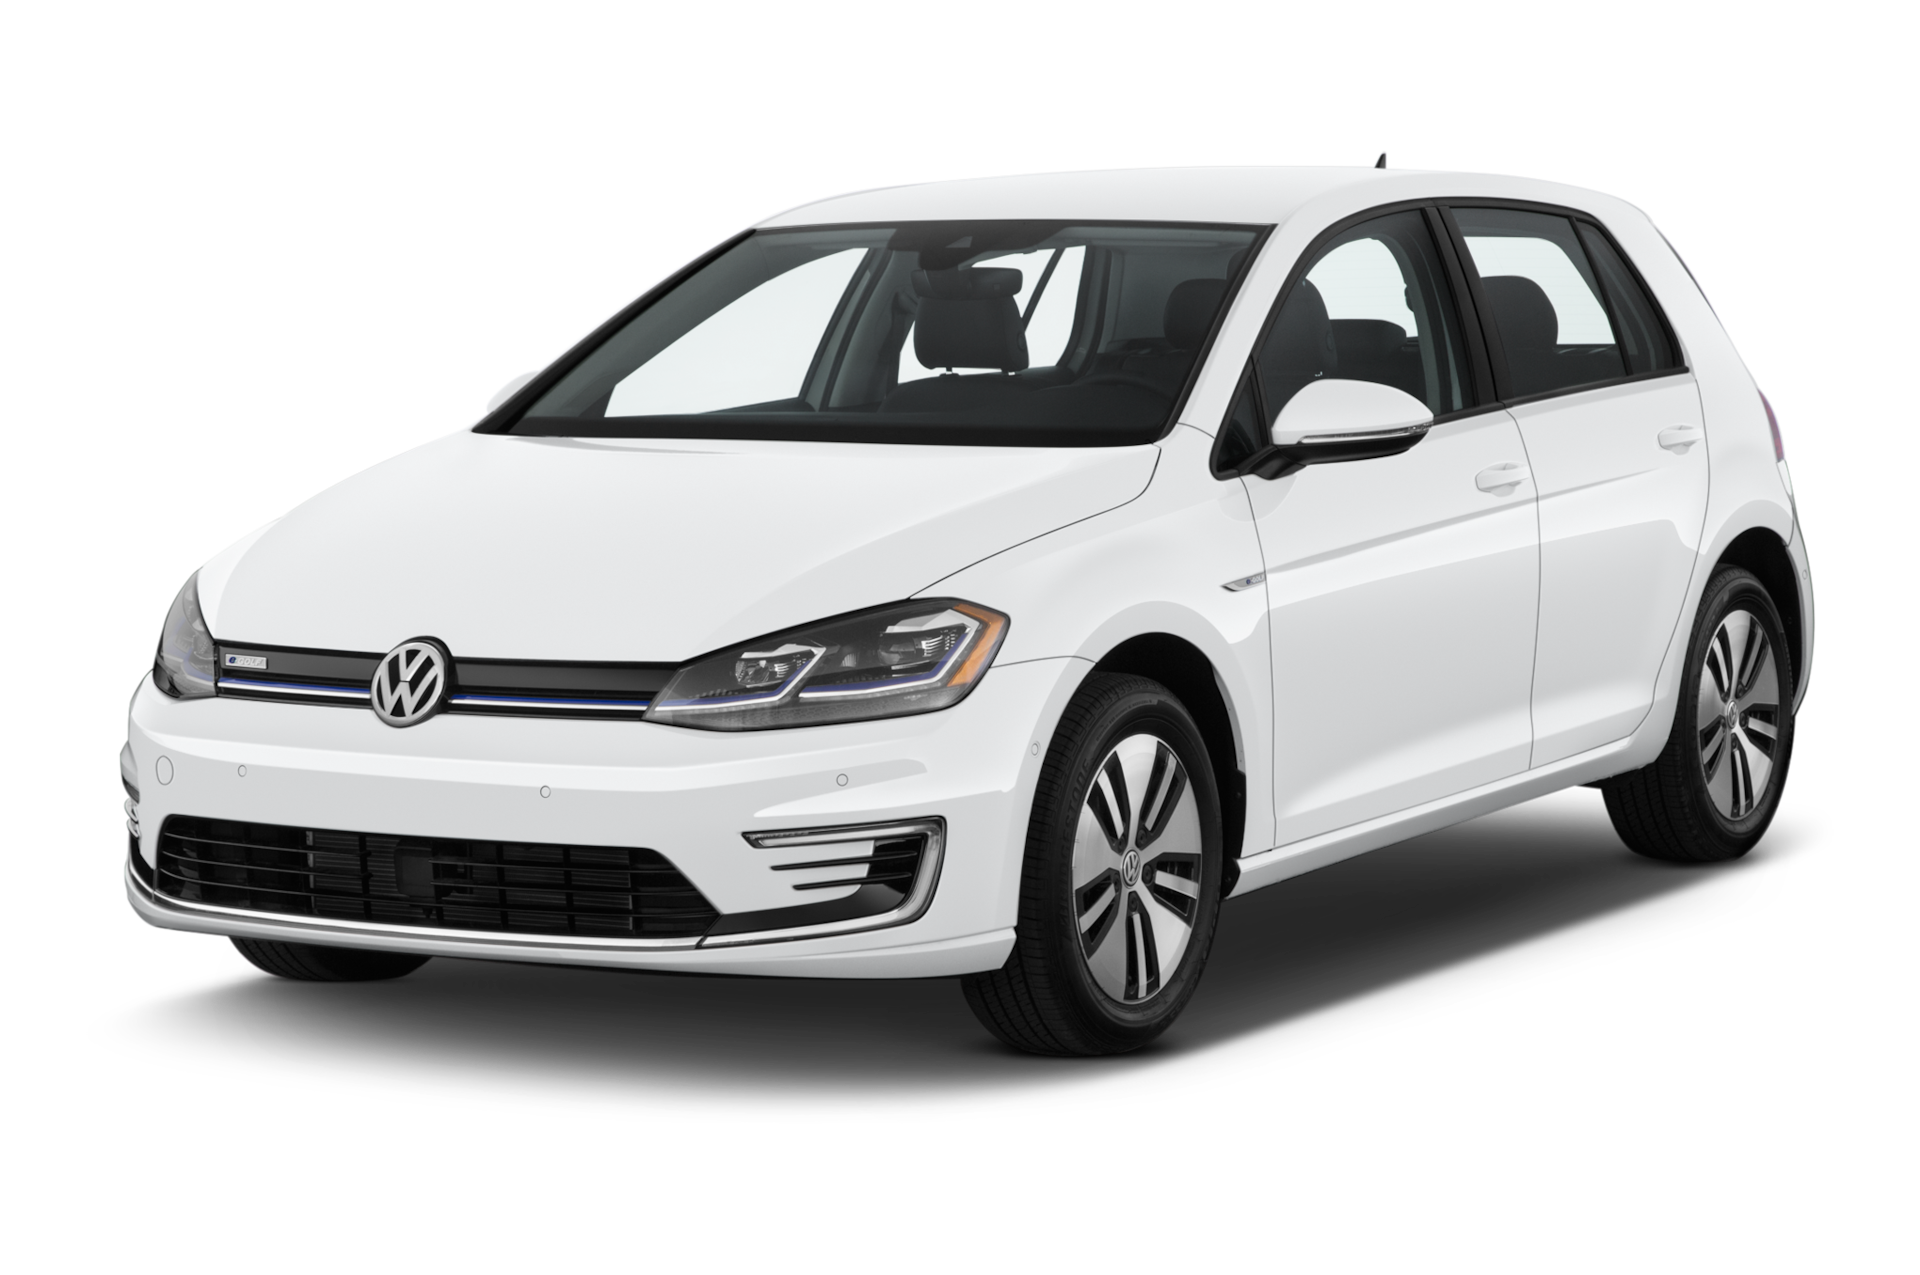 2019 Volkswagen E-Golf Prices, Reviews, and Photos - MotorTrend